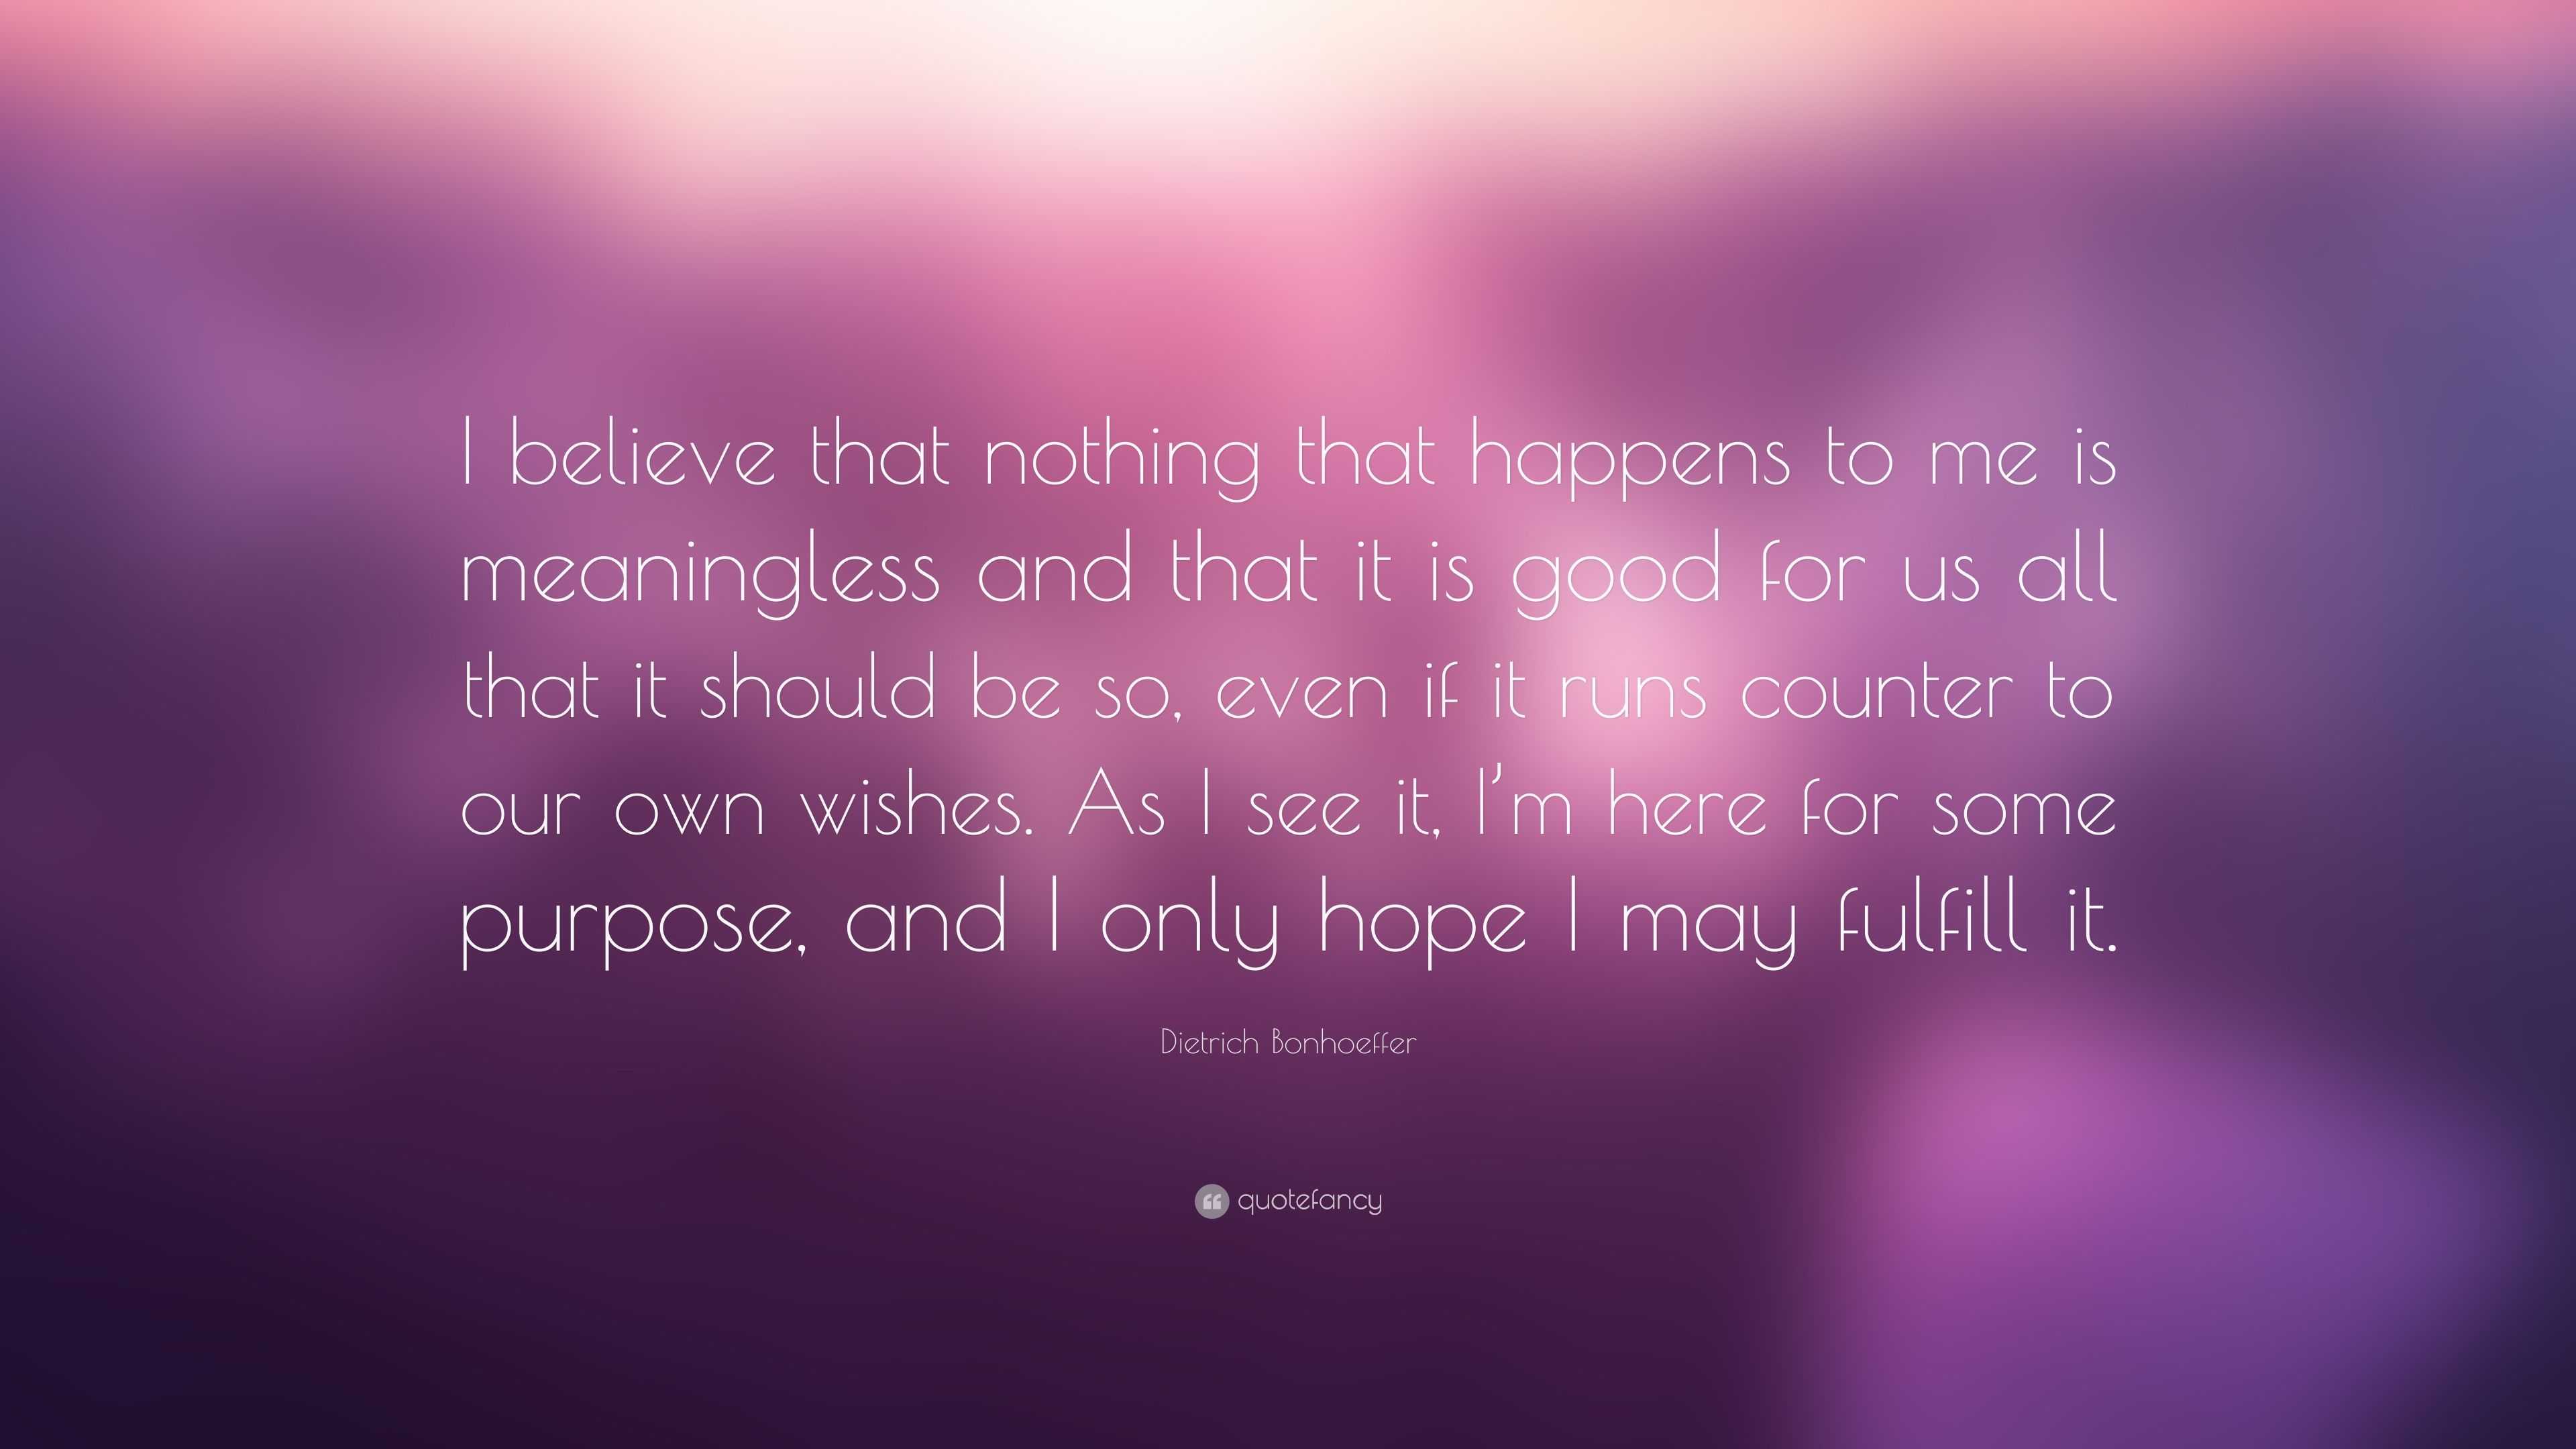 Dietrich Bonhoeffer Quote: “I believe that nothing that happens to me ...